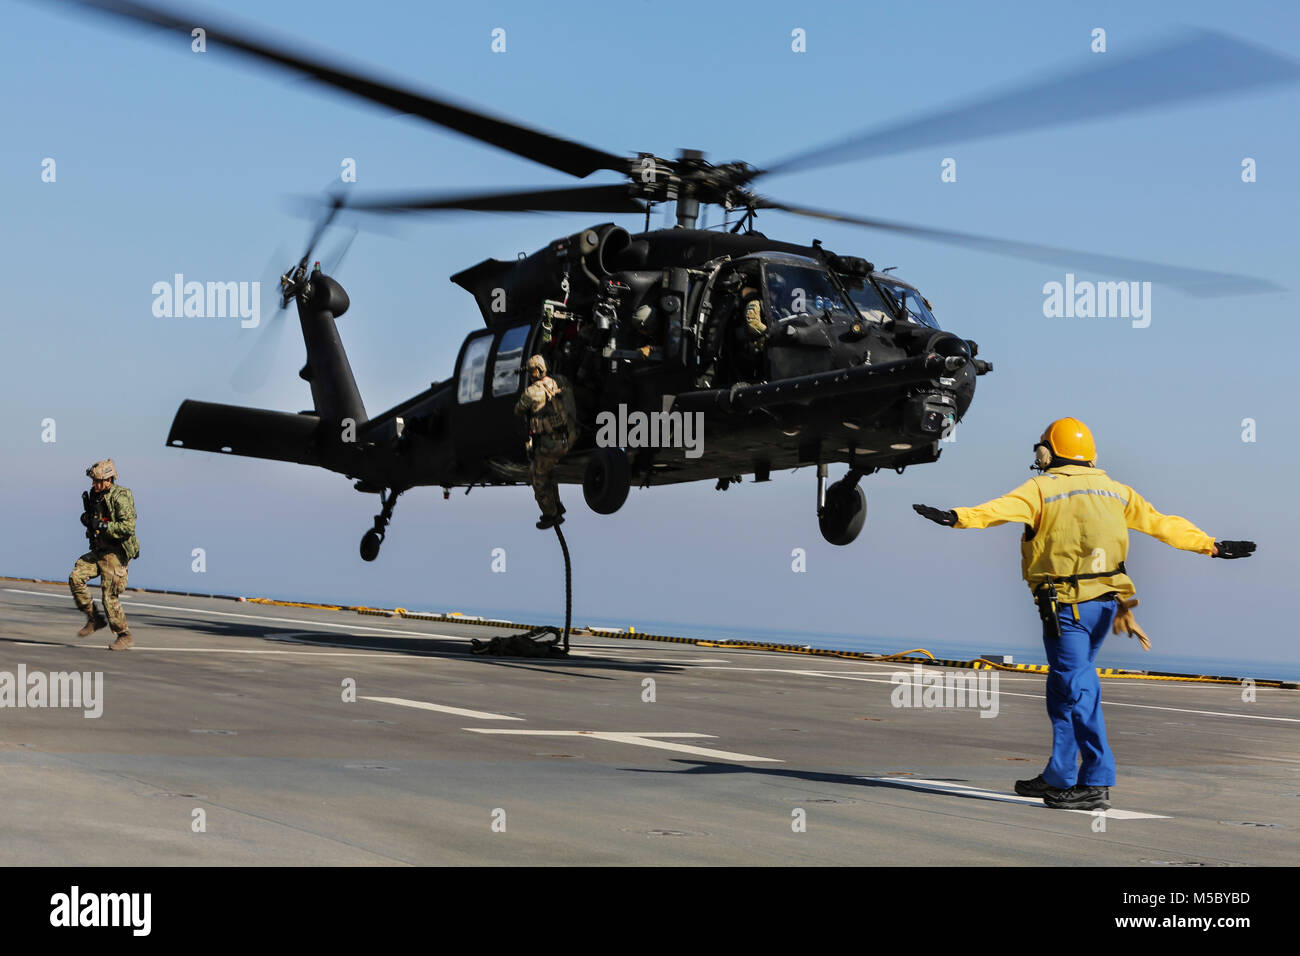 U.S. 5TH FLEET AREA OF OPERATIONS (Feb. 6, 2018) U.S. military forces fast rope out of an U.S. Army UH-60 Black Hawk onto the deck of French amphibious assault ship LHD Tonnerre (L9014) during a bilateral training evolution. The Tonnerre, with embarked Marines and Sailors from Naval Amphibious Force, Task Force 51/5th Marine Expeditionary Brigade and US Special Operations Forces are conducting maritime security operations within the U.S. 5th Fleet area of operations to ensure regional stability, freedom of navigation and the free flow of commerce with regional partners. (U.S. Marine Corps phot Stock Photo